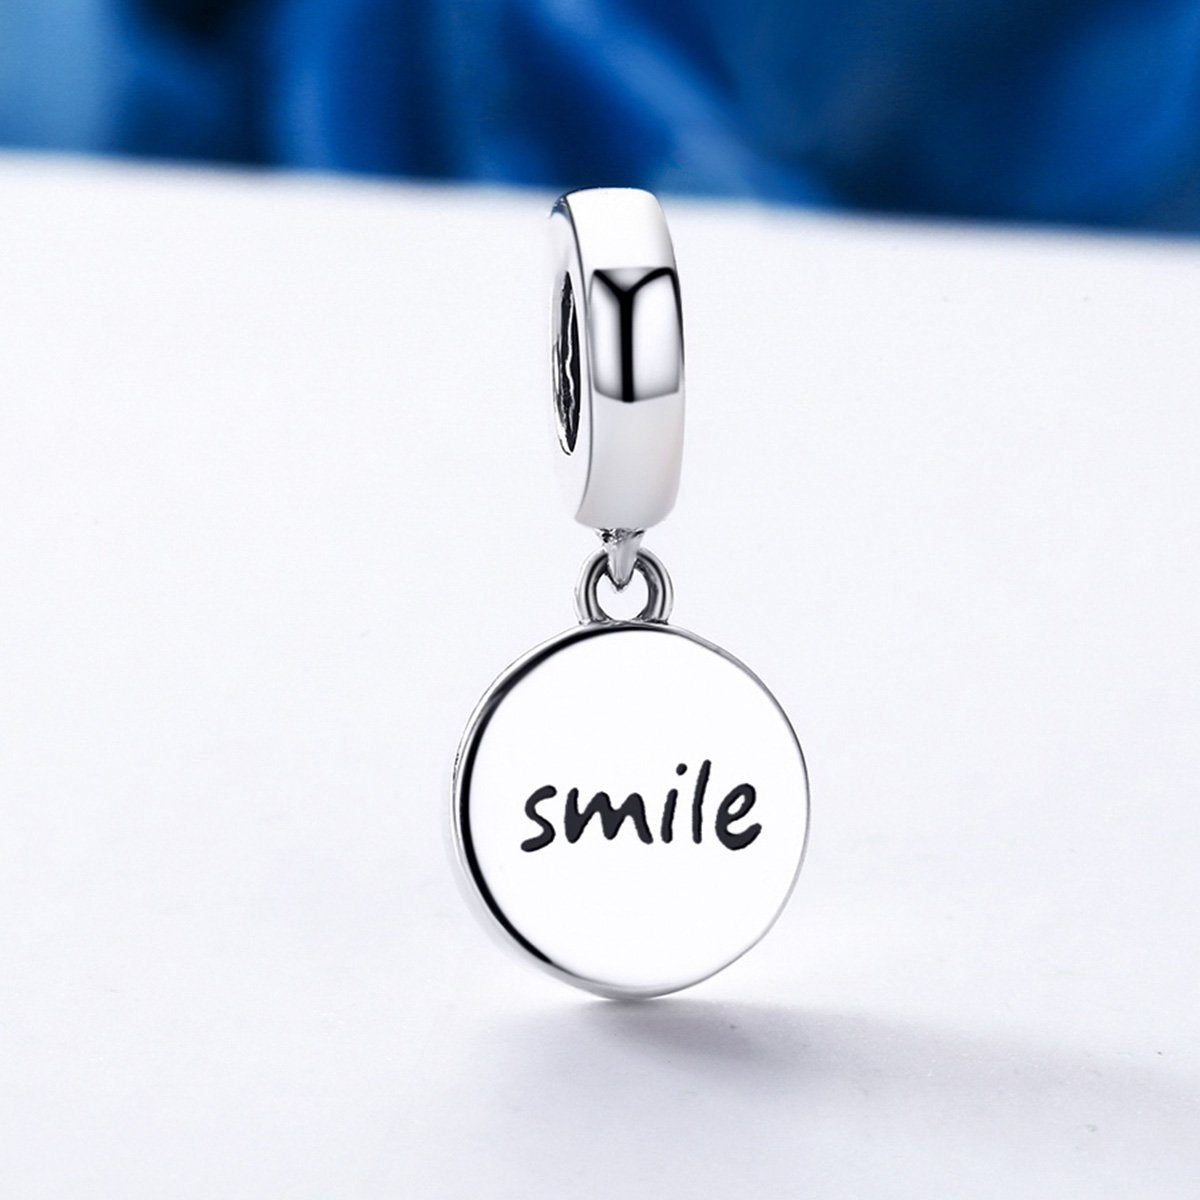 Sterling 925 silver charm the simple smile puls bead pendant fits Pandora charm and European charm bracelet Xaxe.com